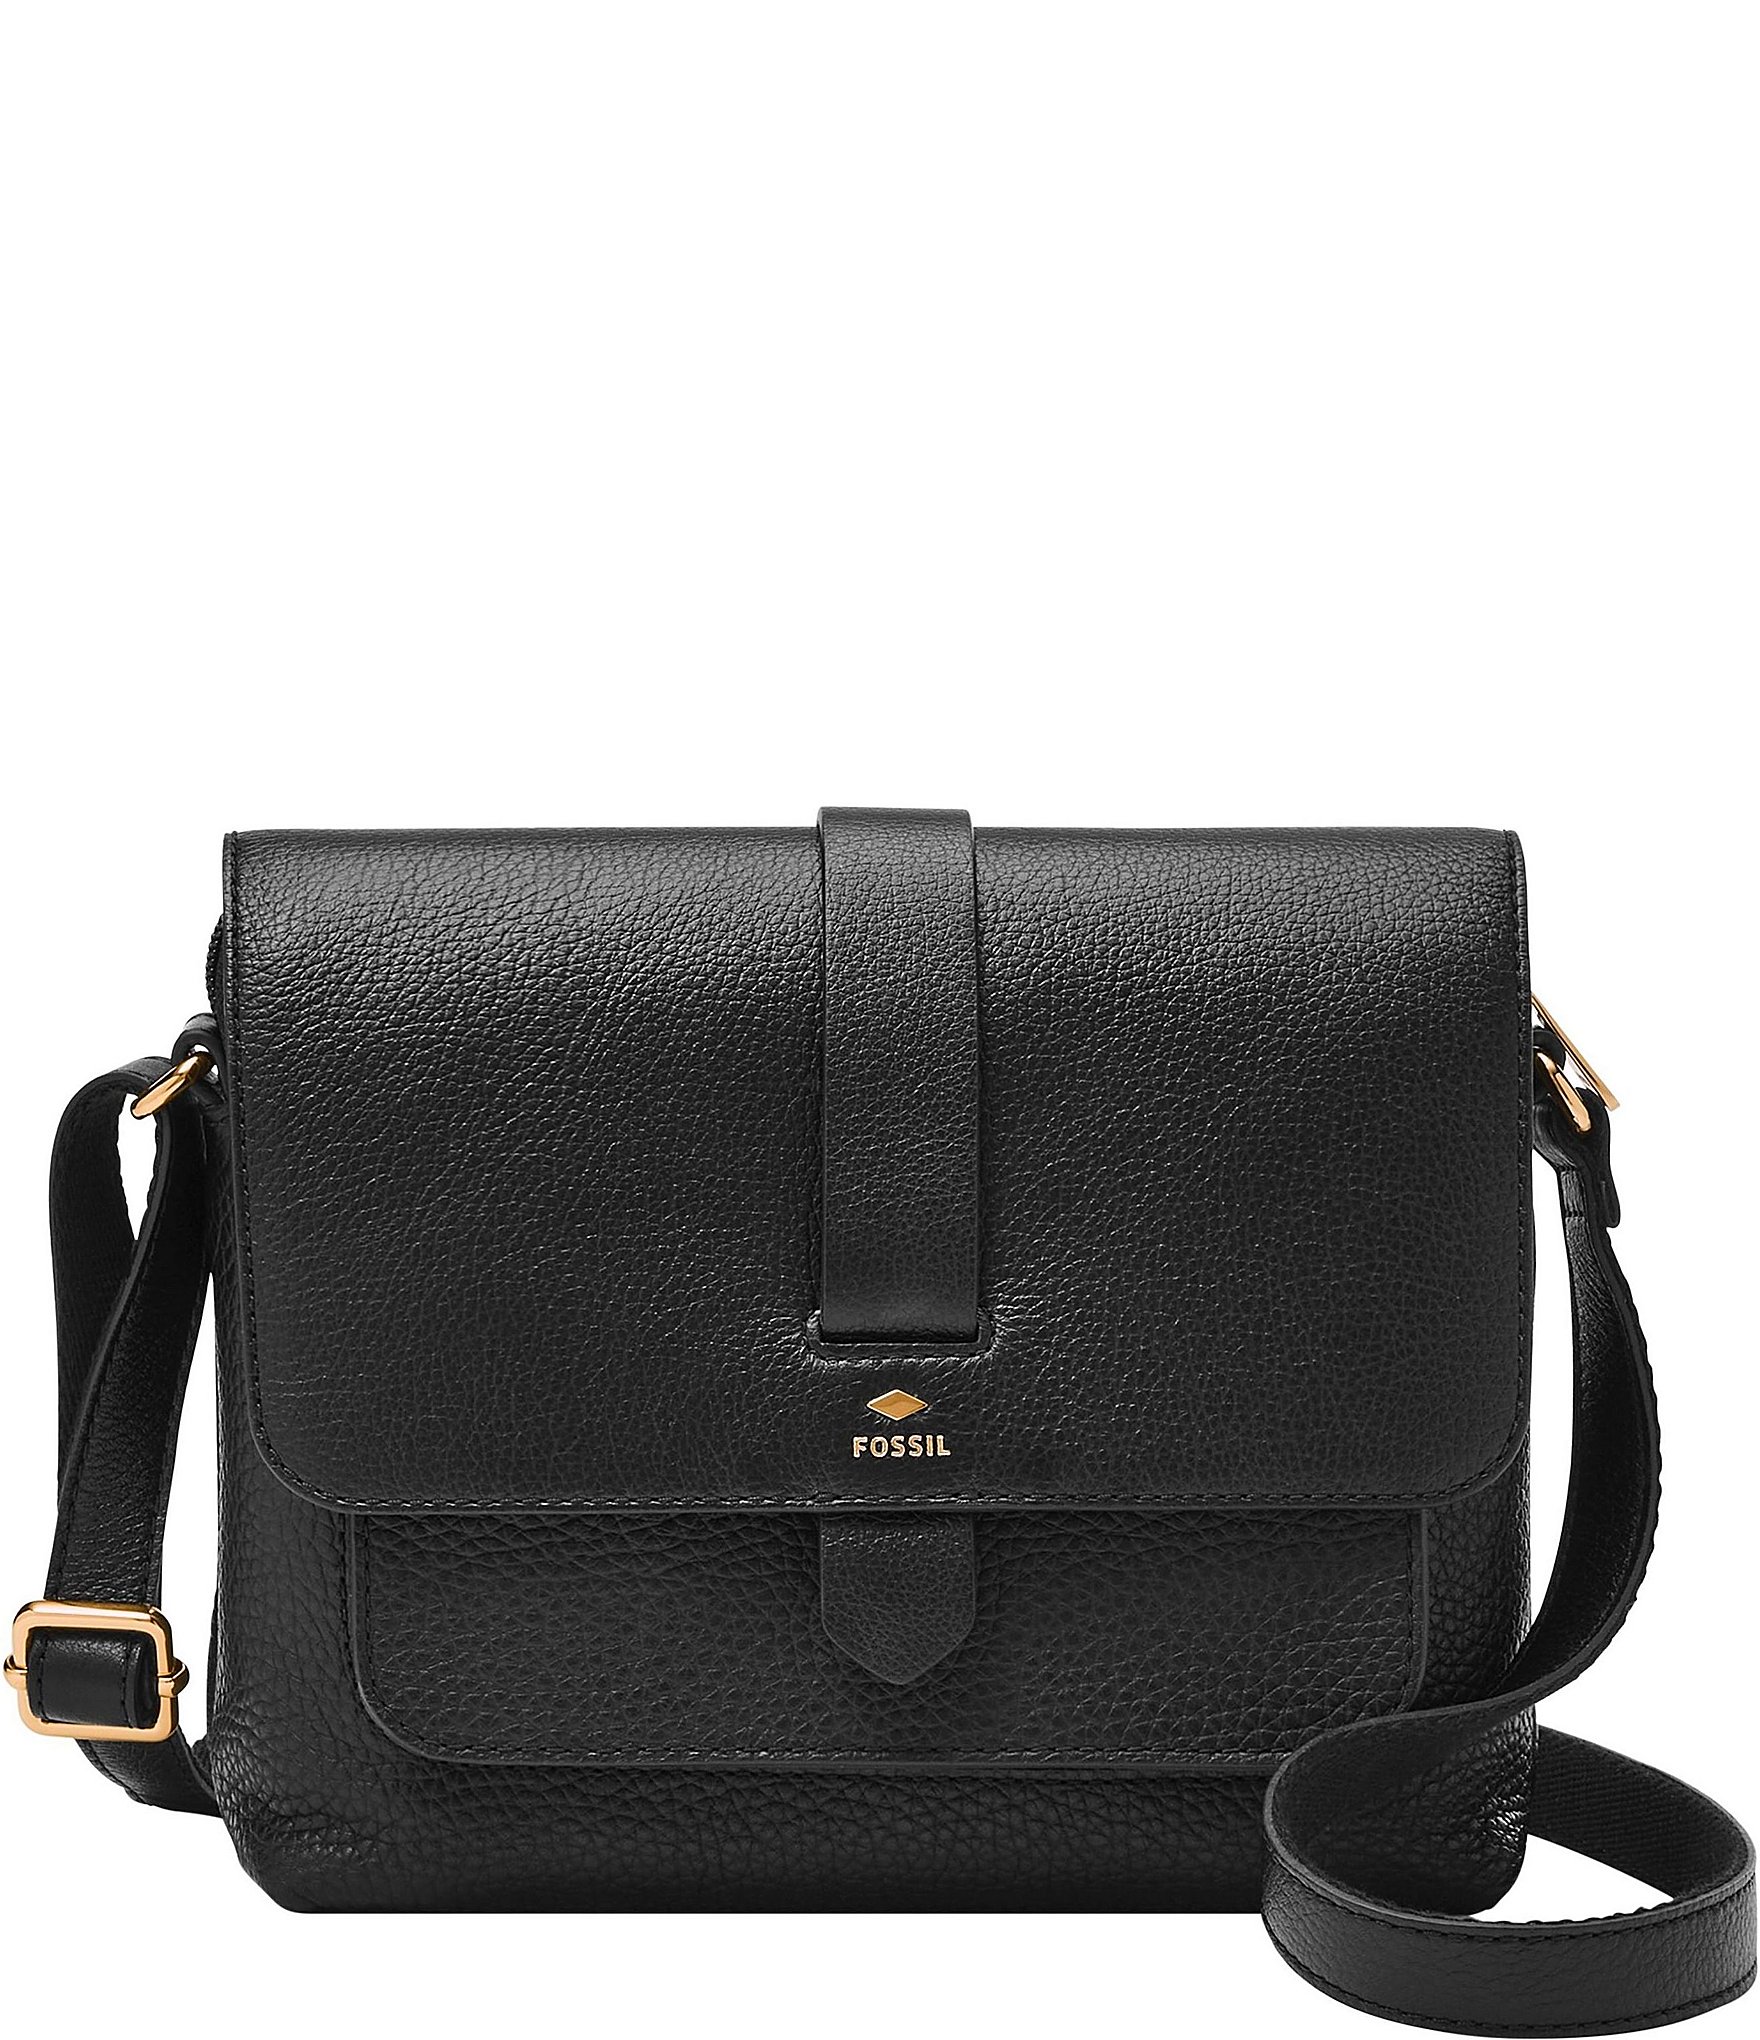 Buy Fossil Handbags Online In India At Best Price Offers | Tata CLiQ